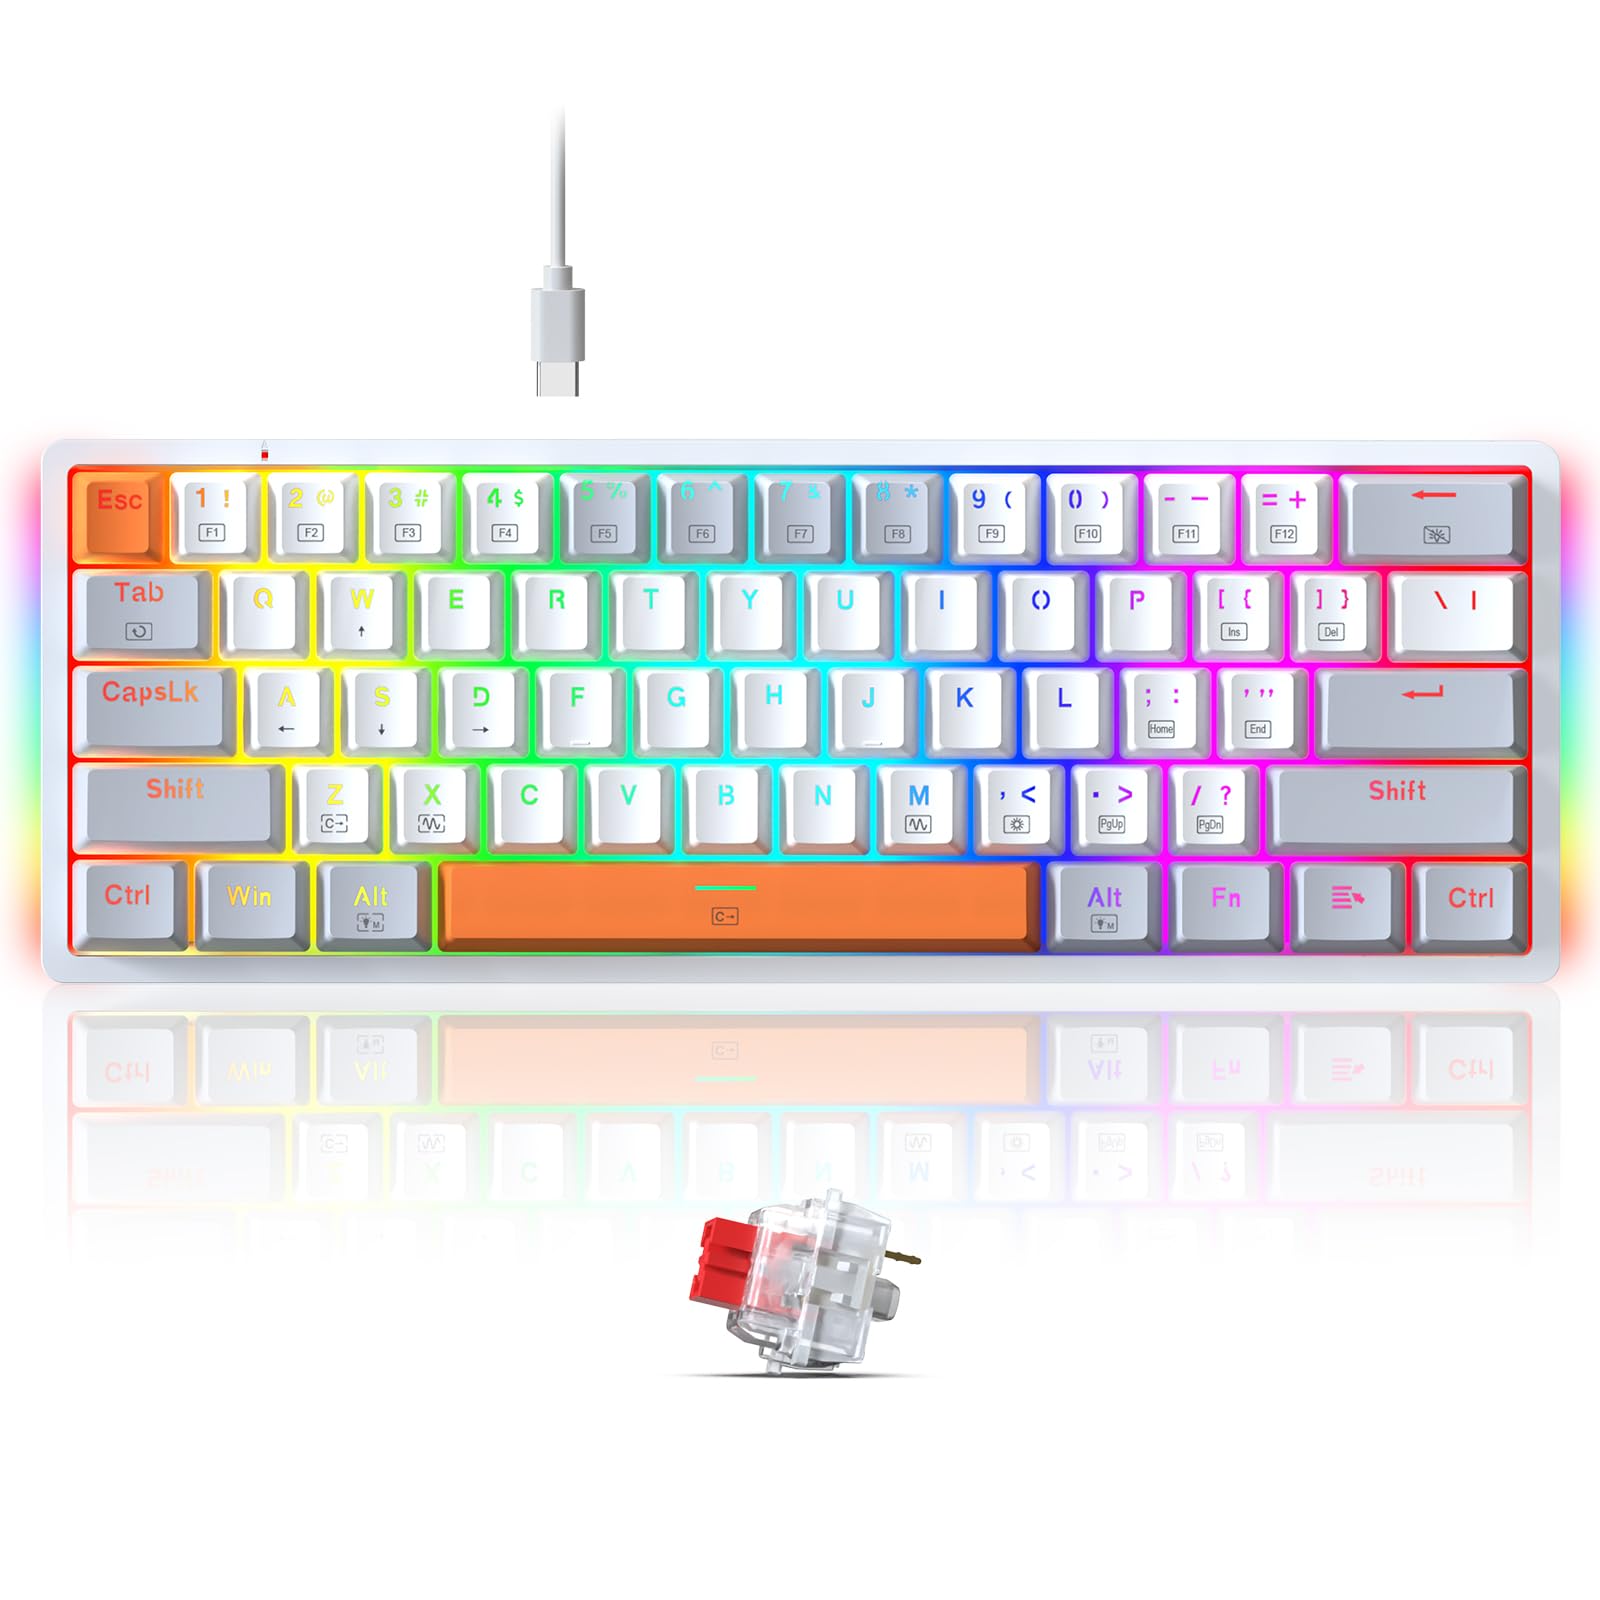 60% Keyboard Mechanical, Mini Wired Gaming Keyboard Compact 60 Percent Keyboard, RGB Backlit Hot-Swappable Red Switch Fully Programmable for Windows Laptop PC Mac,K642WGO White-Gray